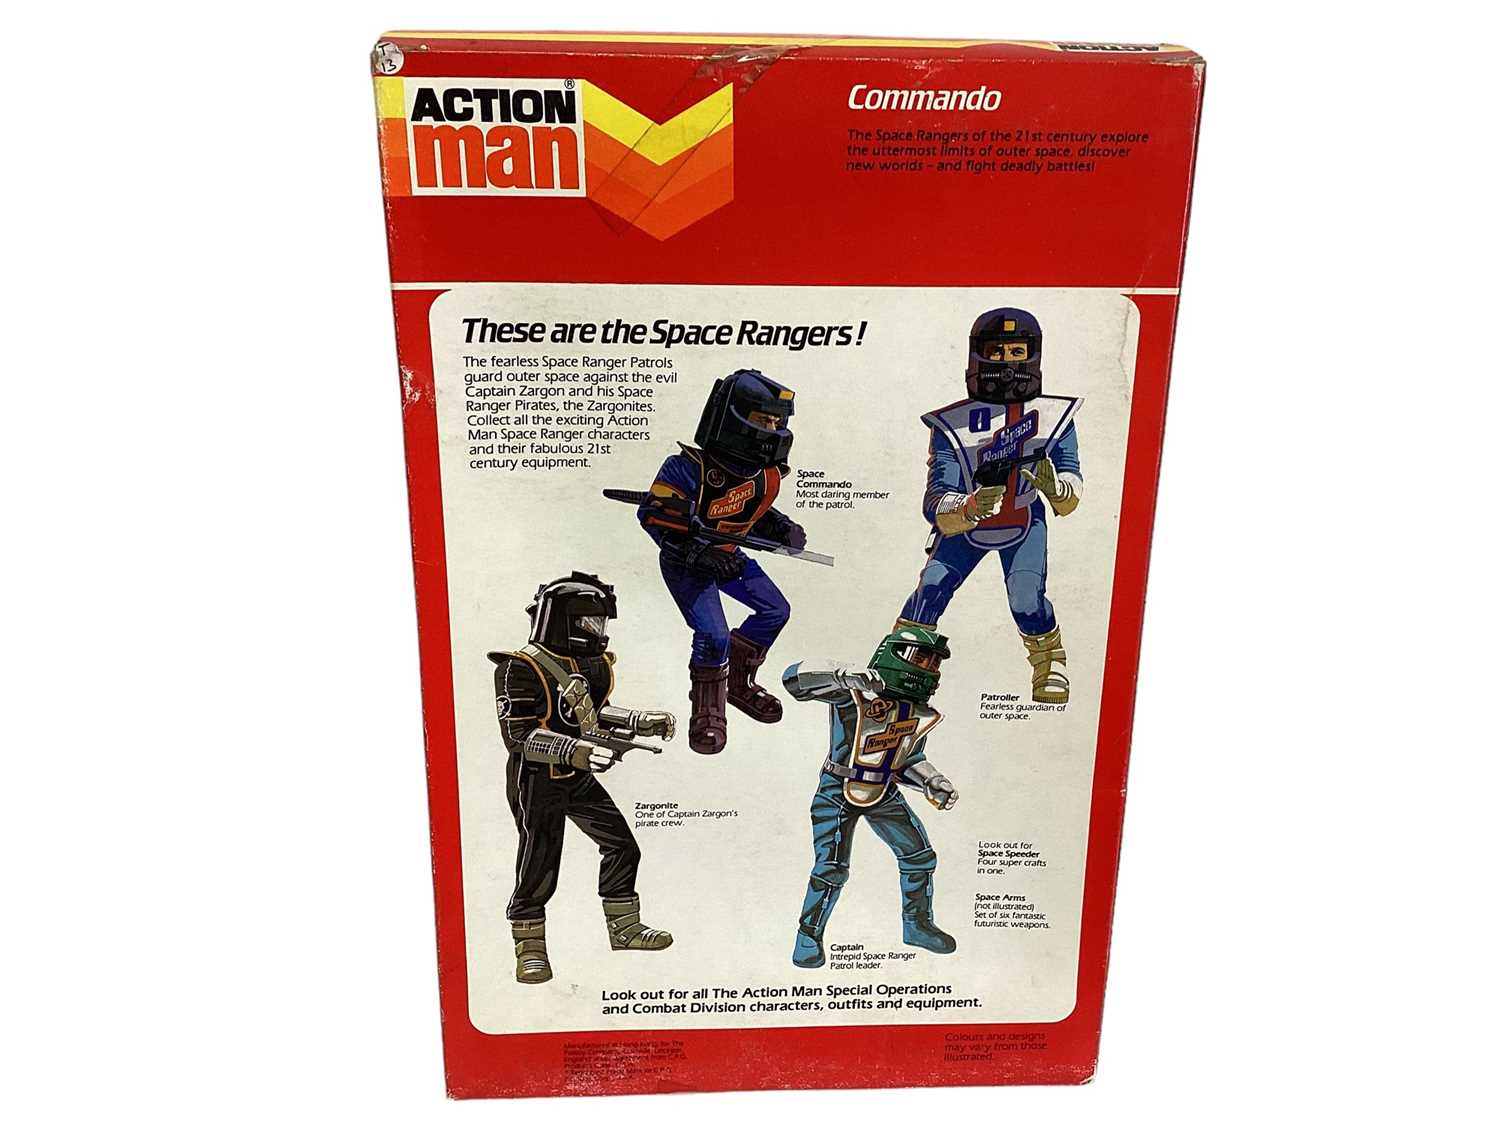 Palitoy ( 1977-1983) Action Man Space Ranger Commando Outfit, boxed with bubblepack, No.934827 (1) - Image 2 of 2